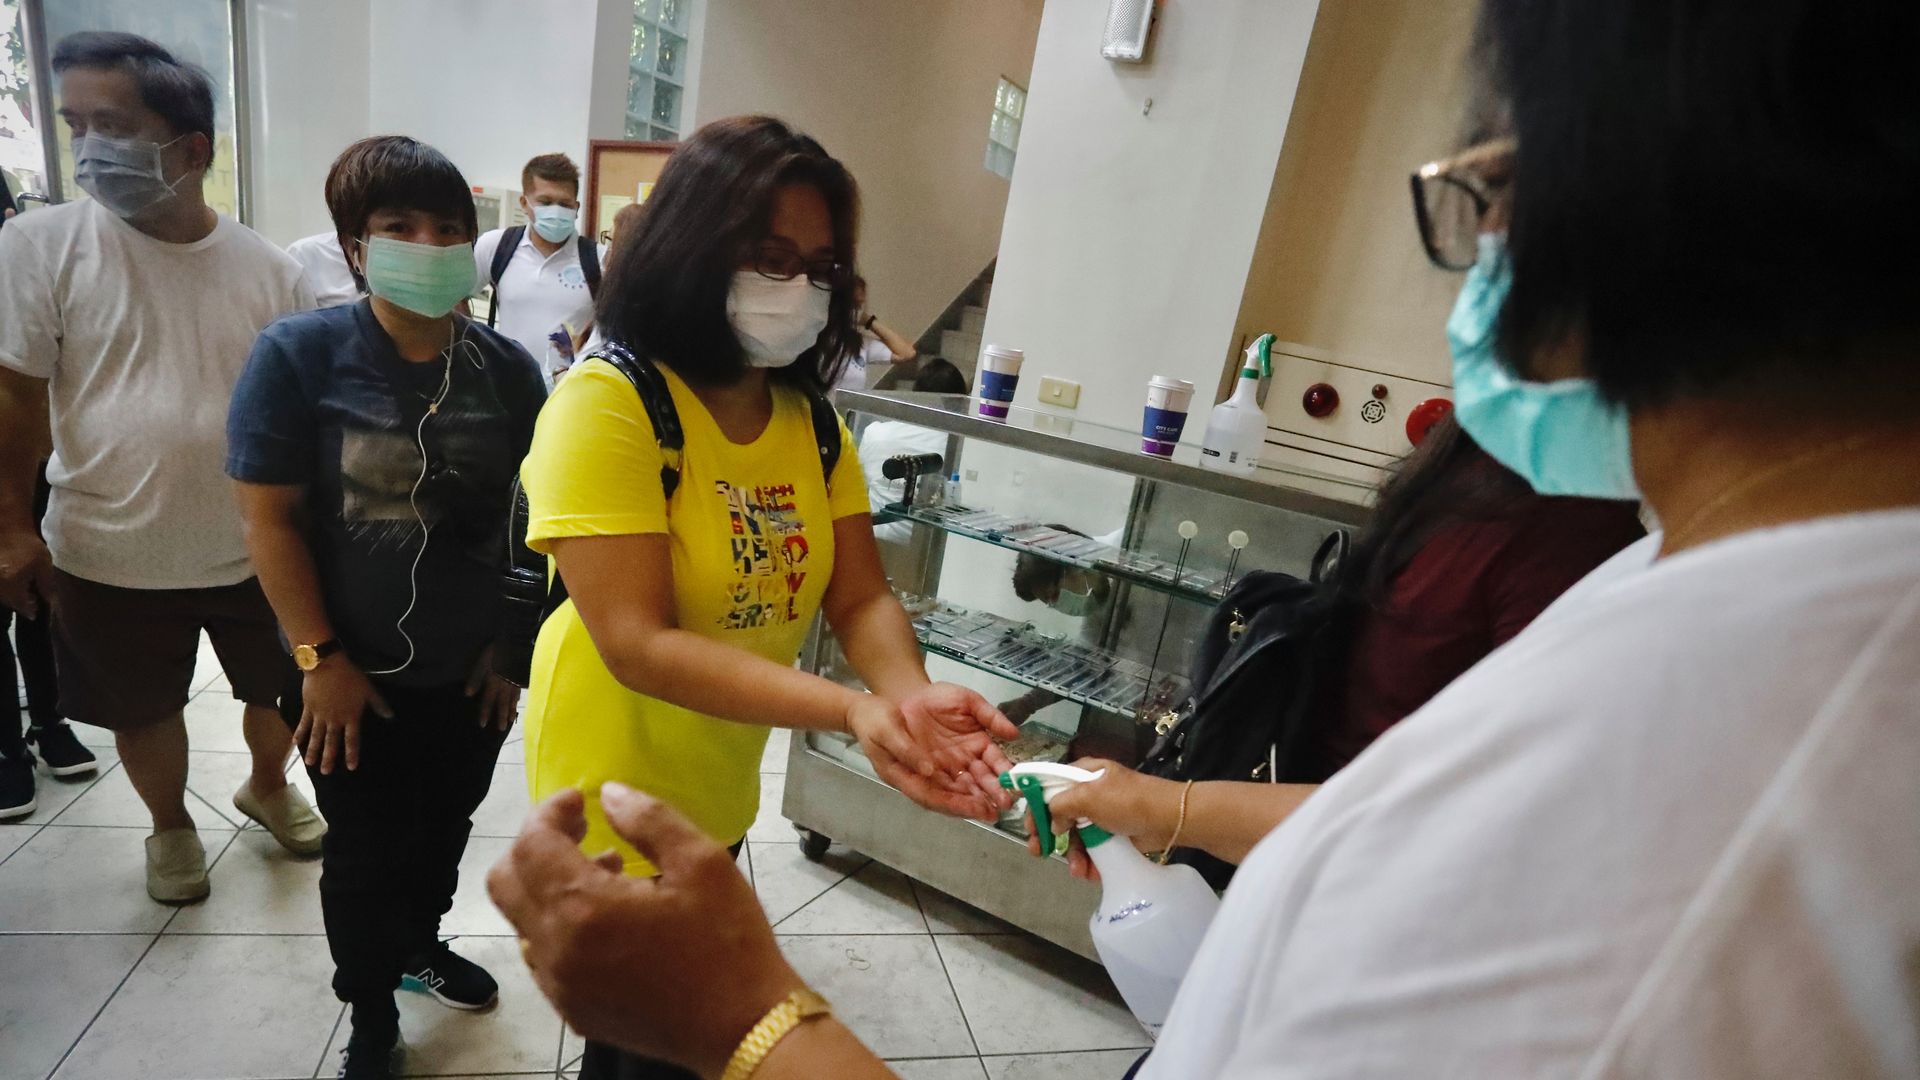 Catholics go through containment protocols including body-temperature measurement and hands-sanitisation before entering the Saint Christopher Parish Church, Taipei City, Taiwan, 26 July 2020. 